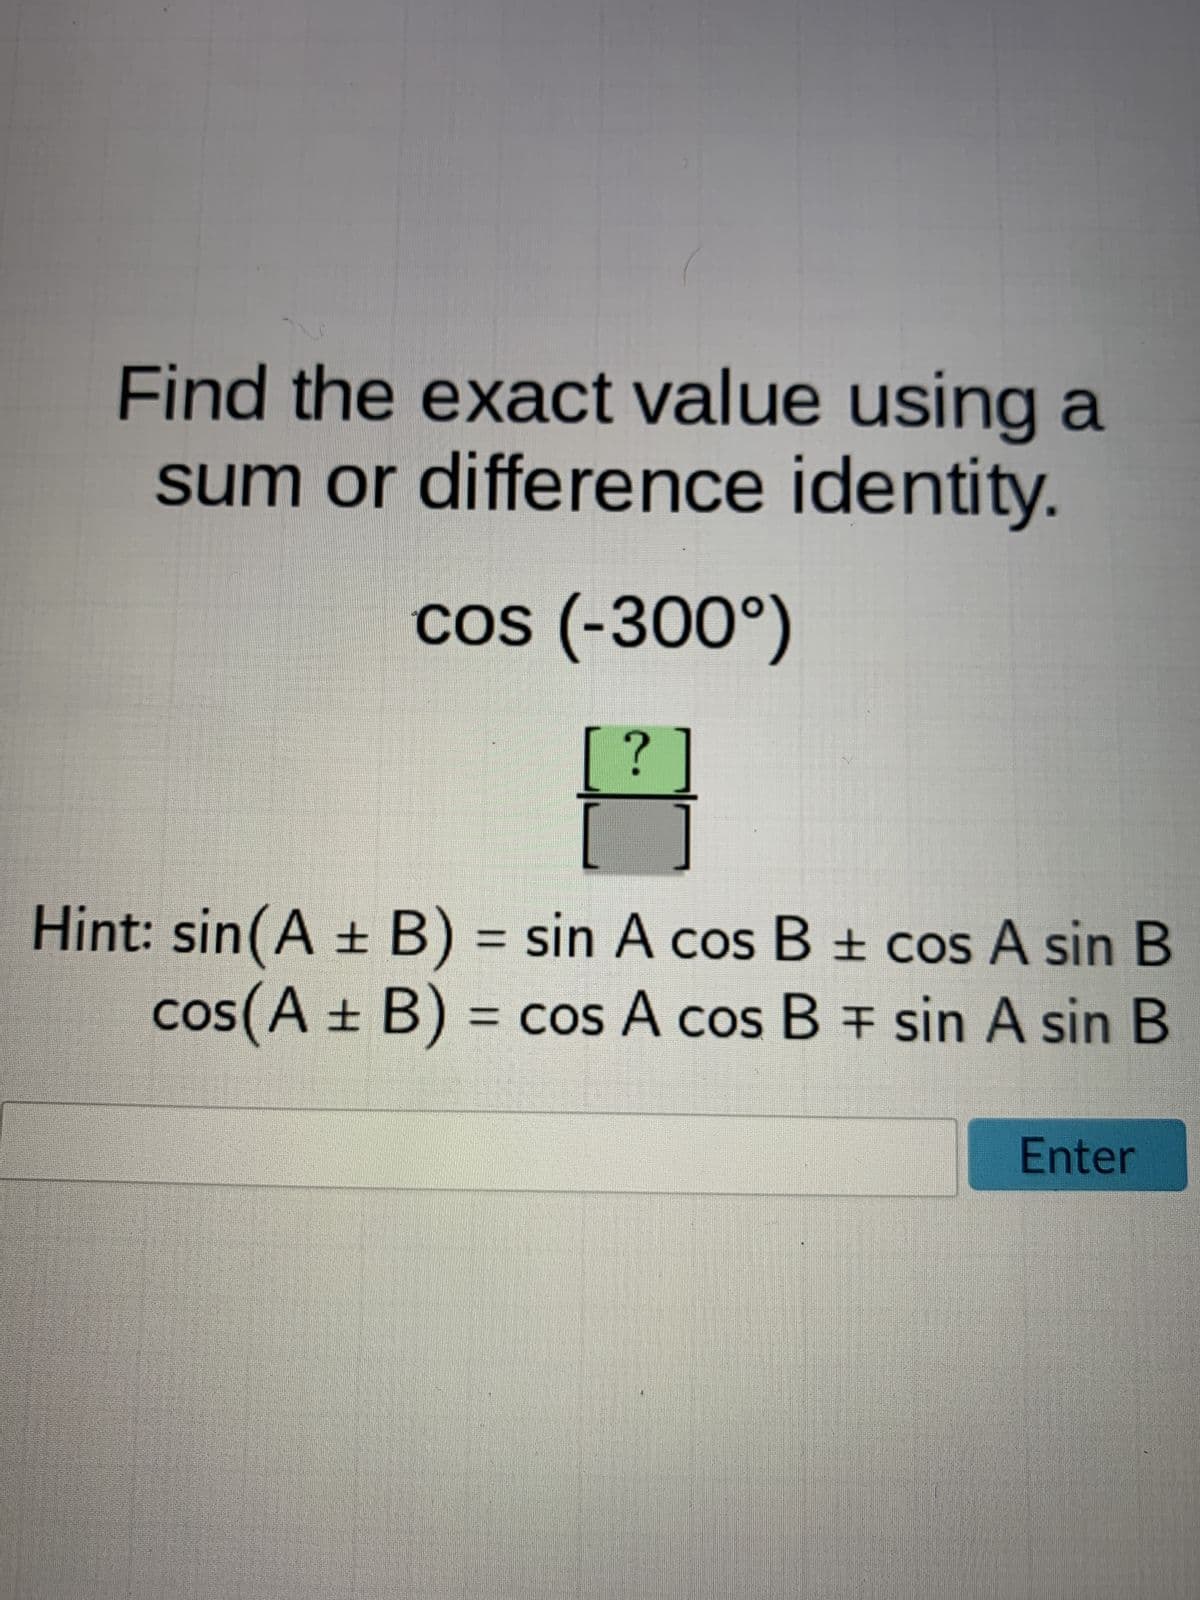 Find the exact value using a
sum or difference identity.
cos (-300°)
?
Hint: sin(A + B) = sin A cos B ± cos A sin B
cos(A + B) = cos A cos B = sin A sin B
Enter